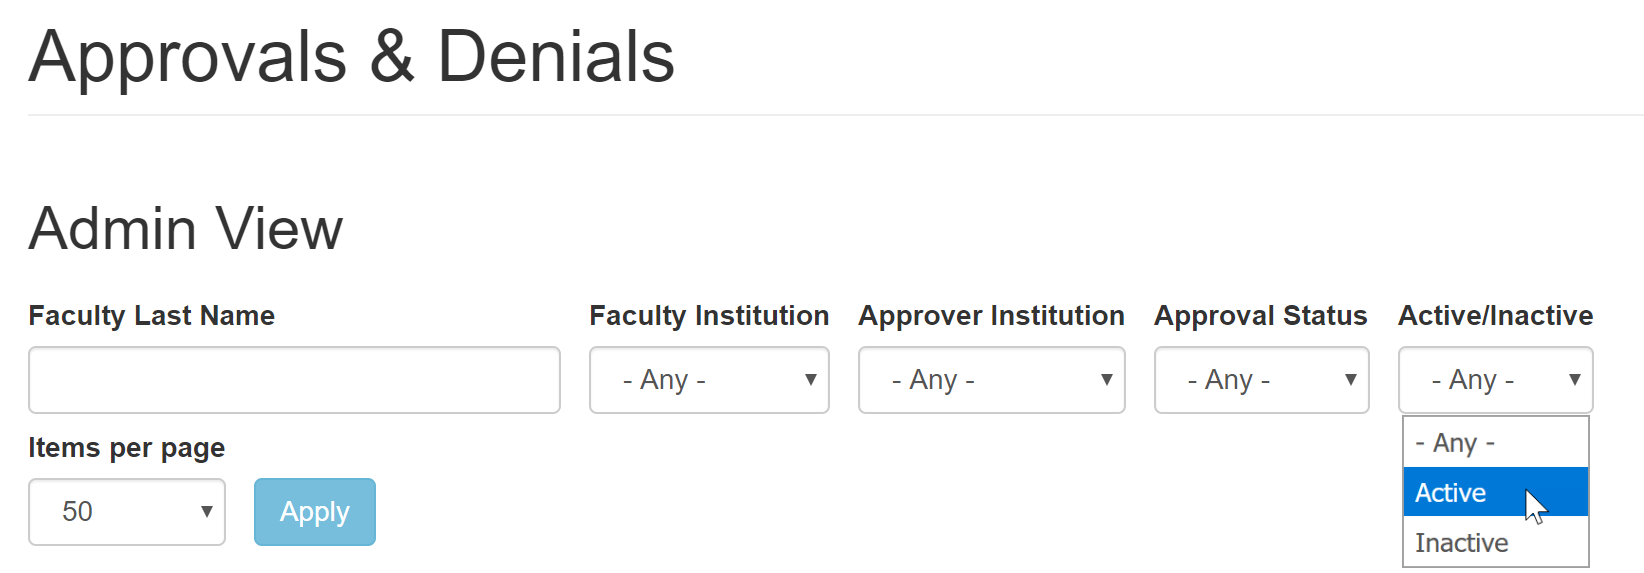 Screen image of the Approvals & Denials tab search page. Search field displayed are Faculty Last Name, Faculty Institution, Approver Institution and Approval Status.